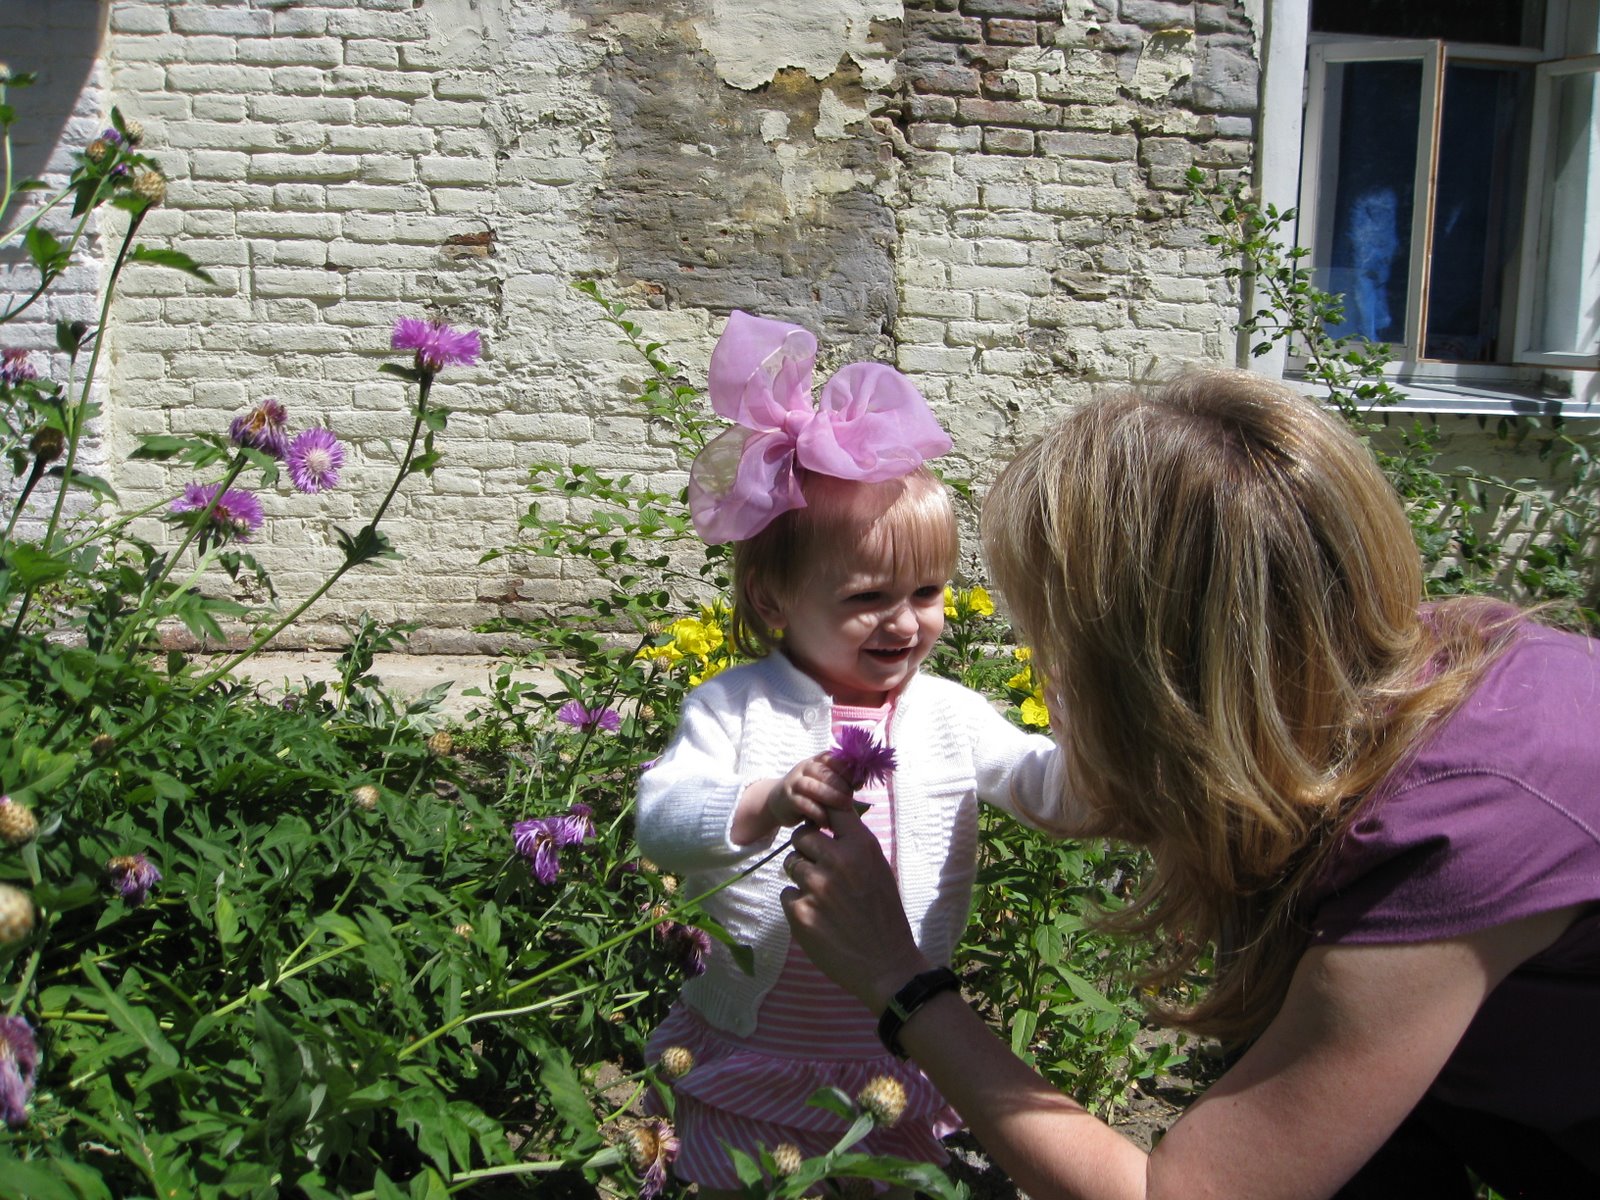 Teaching her to smell the flowers....not destroy them.